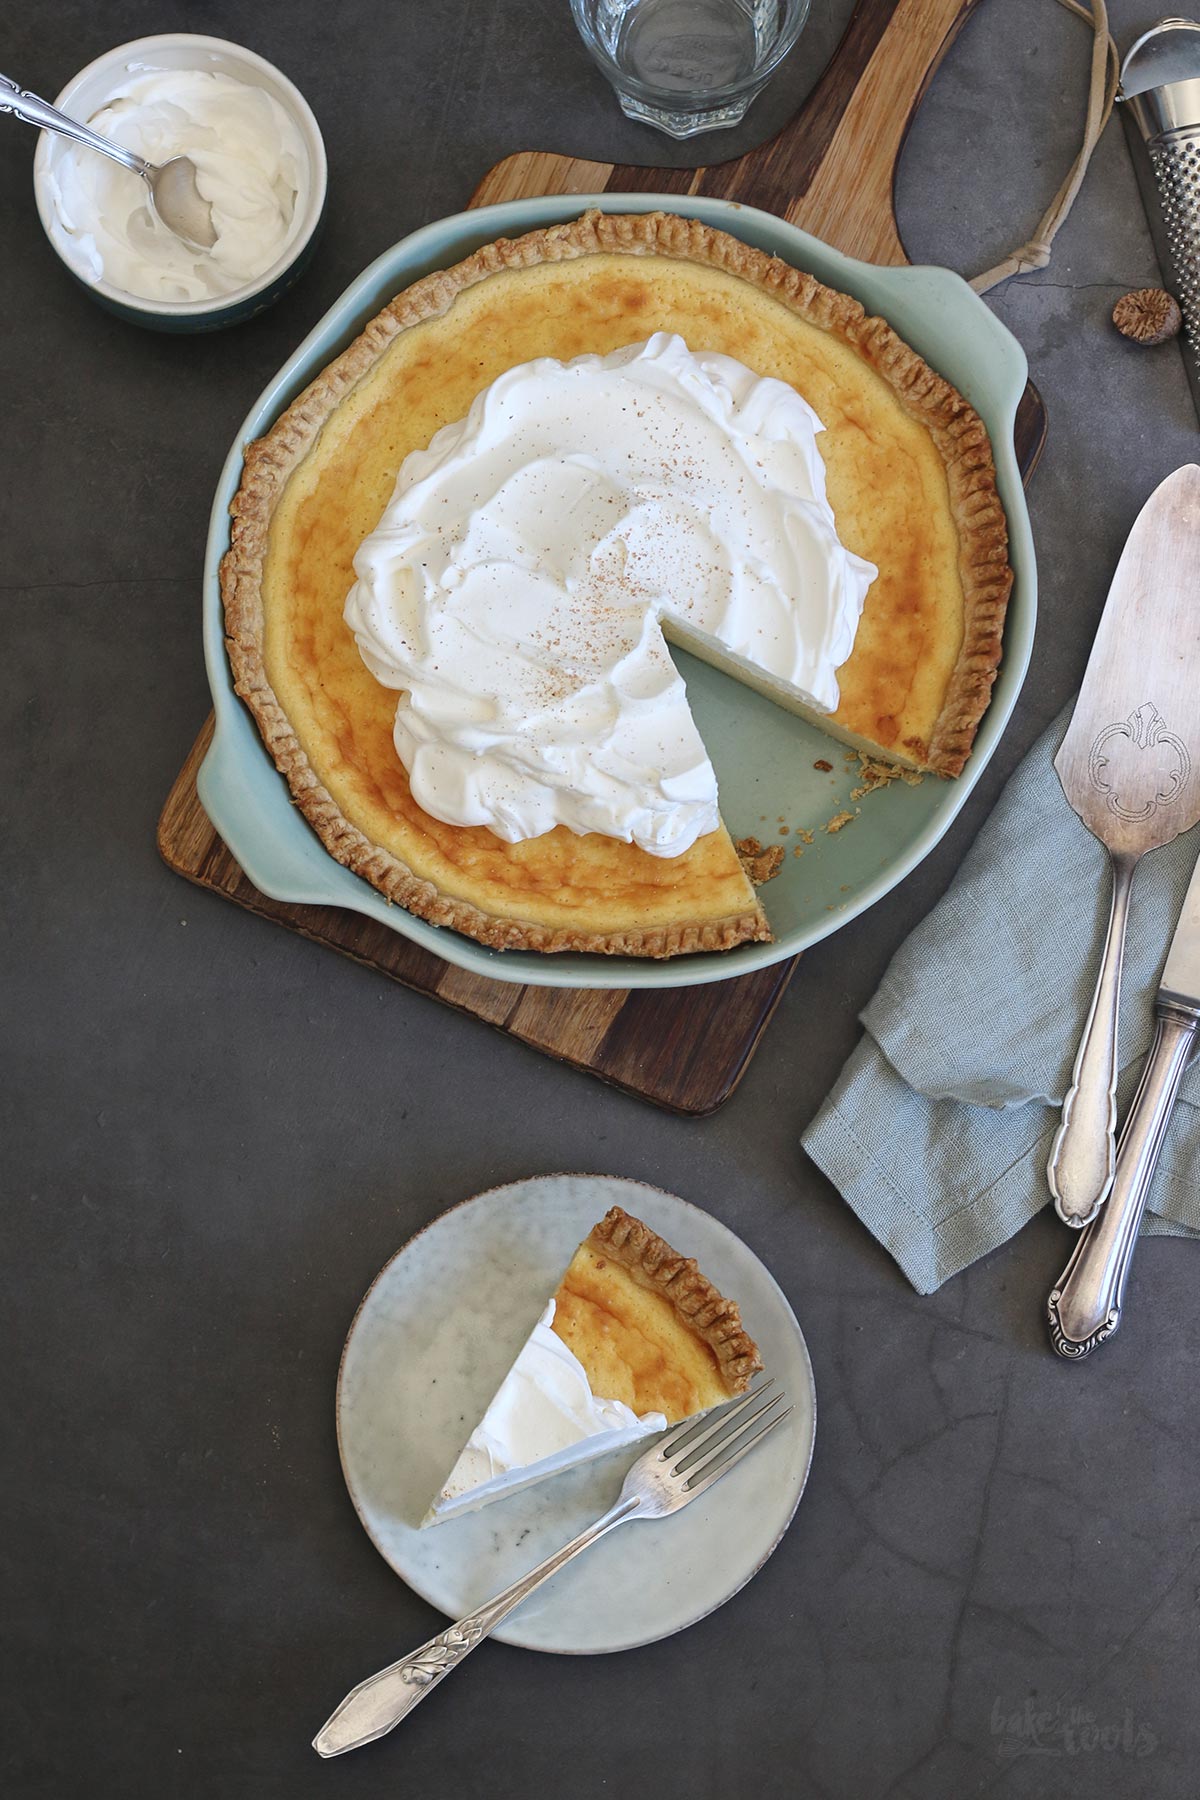 Easy Buttermilk Pie | Bake to the roots